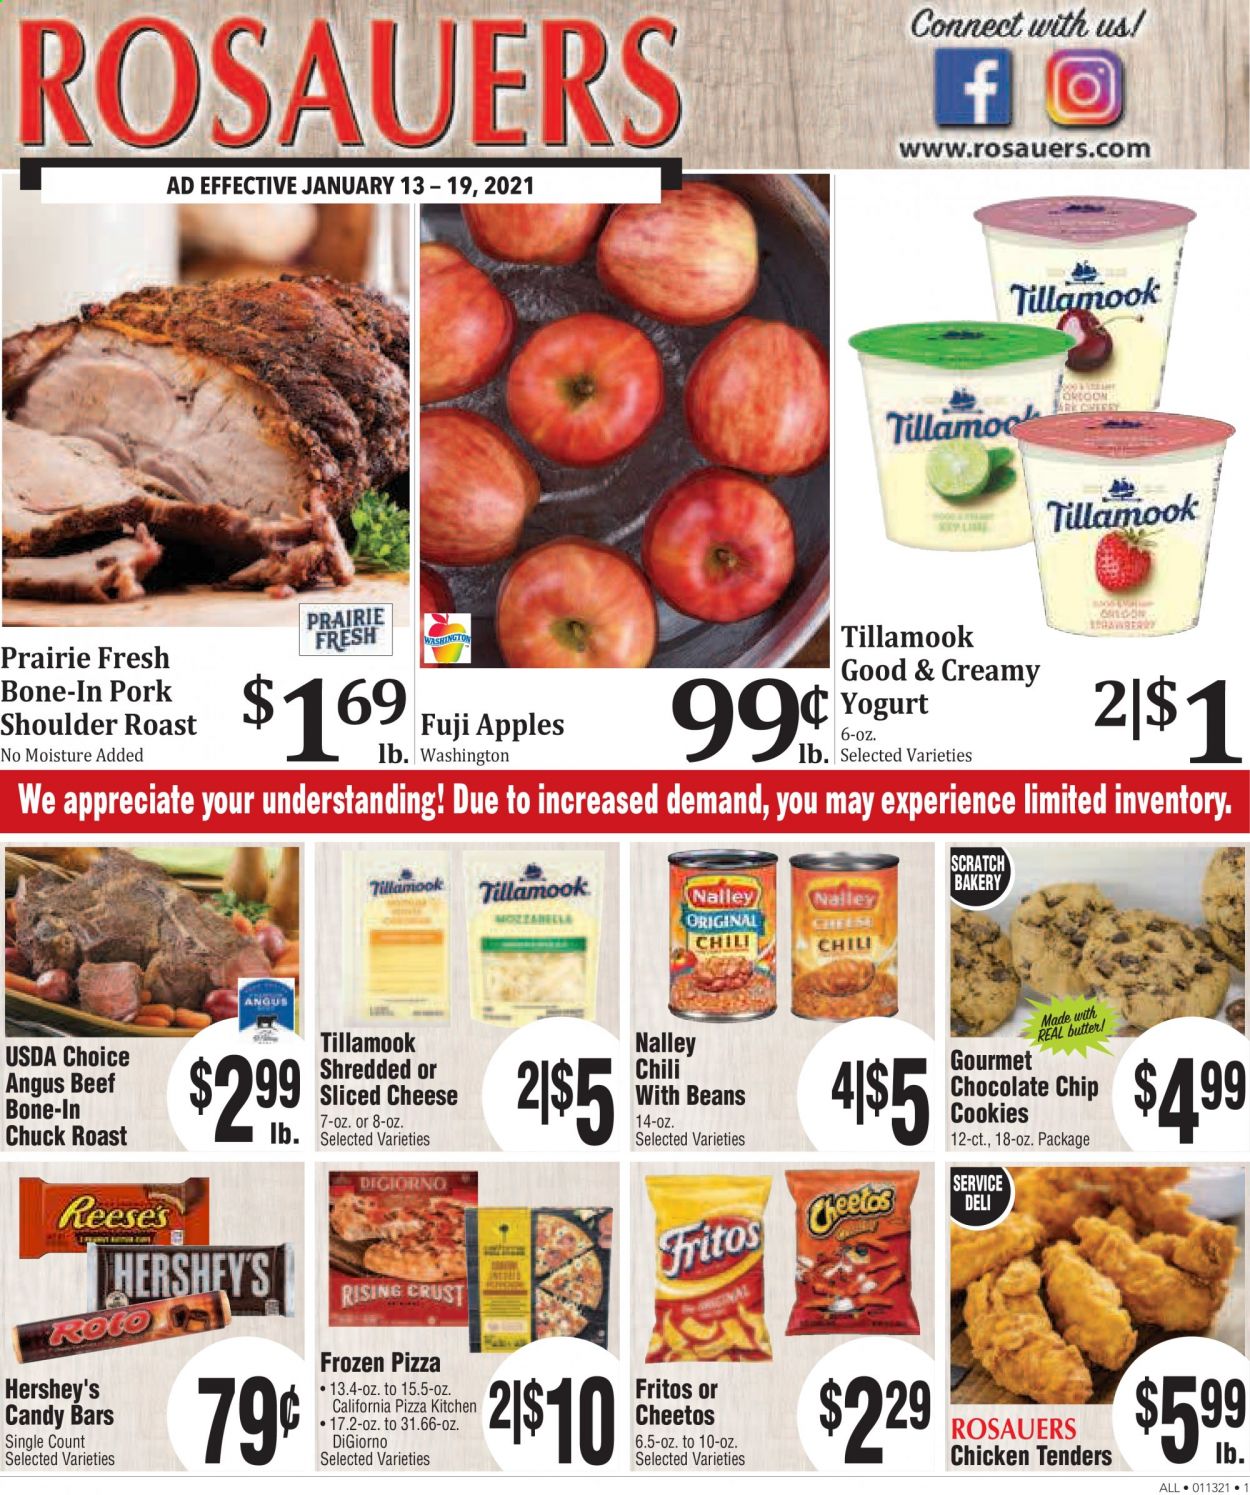 thumbnail - Rosauers Flyer - 01/13/2021 - 01/19/2021 - Sales products - Fuji apple, apples, pizza, sliced cheese, cheese, yoghurt, Hershey's, beans, cookies, Cheetos, Fritos, chicken tenders, beef meat, chuck roast, pork meat, pork roast, pork shoulder, beef bone. Page 1.